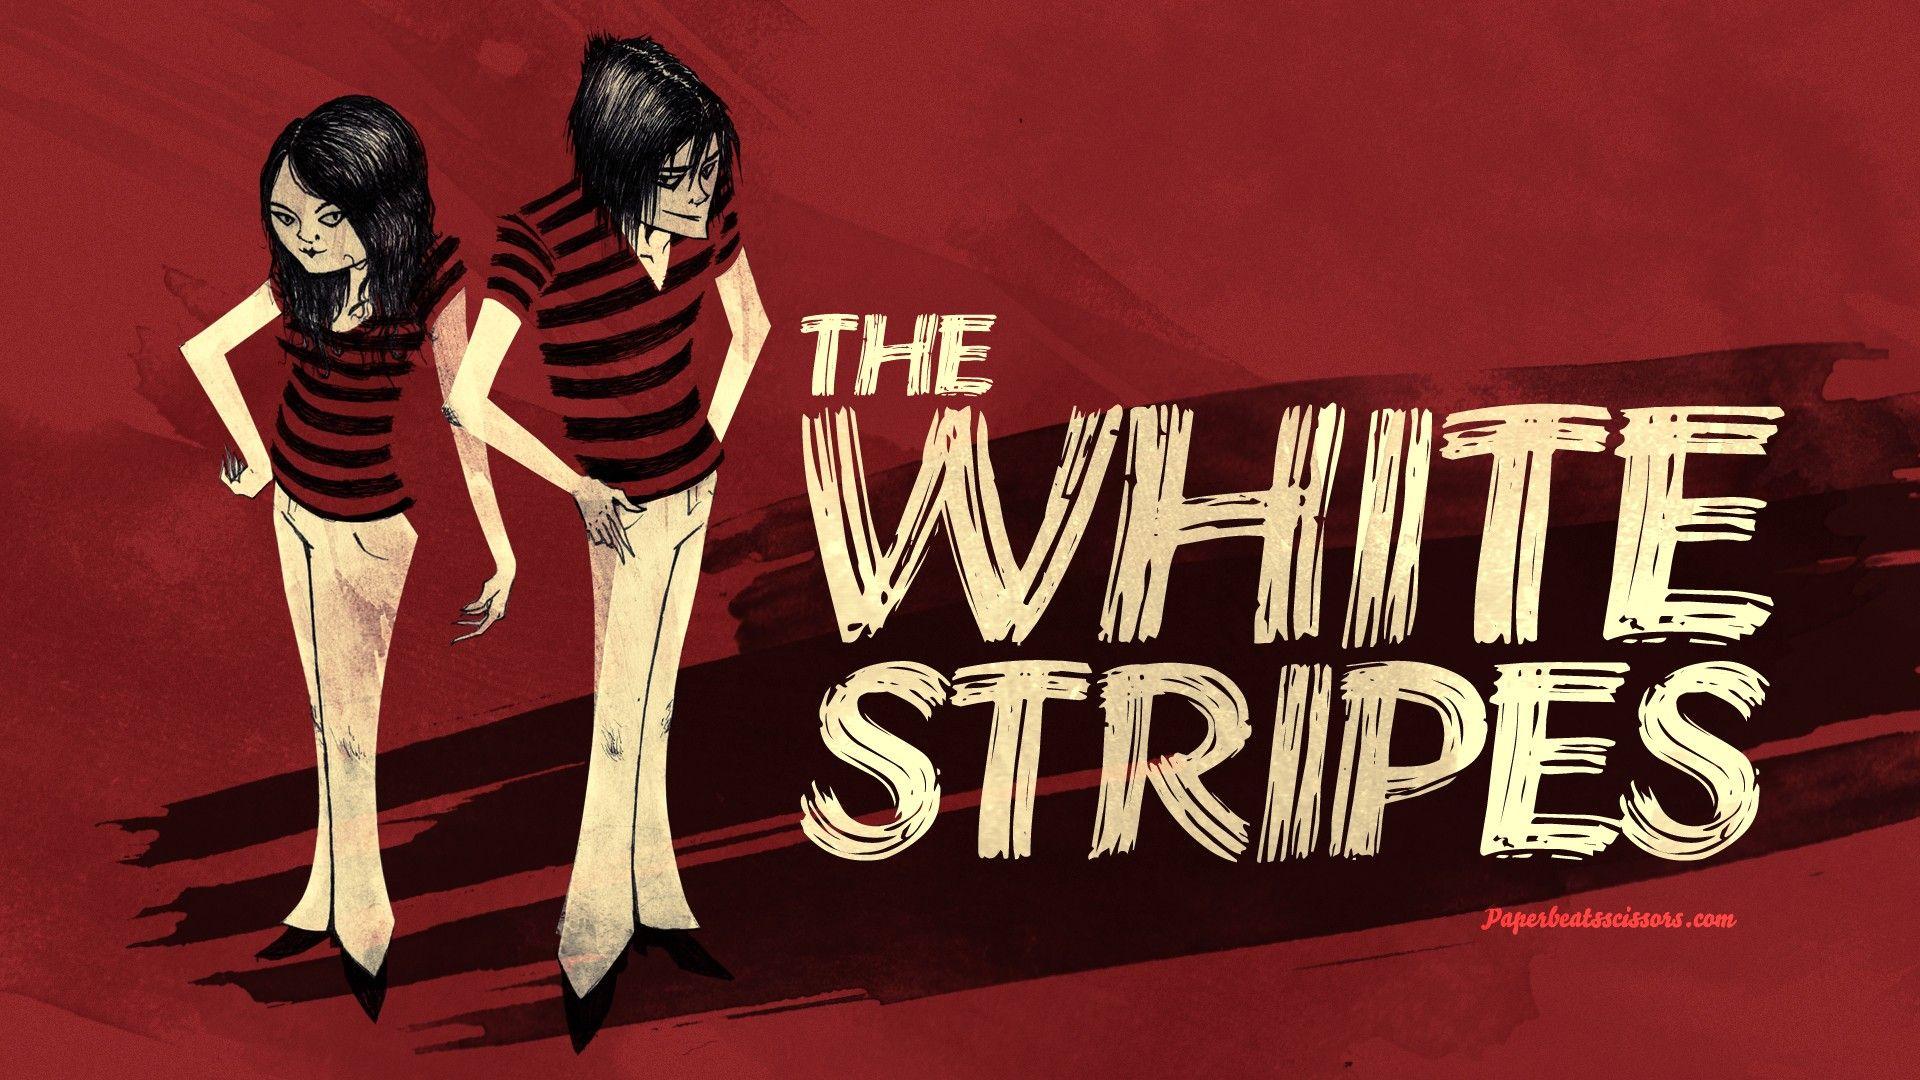 music, Rock music, The White Stripes, cover art, Rock Band